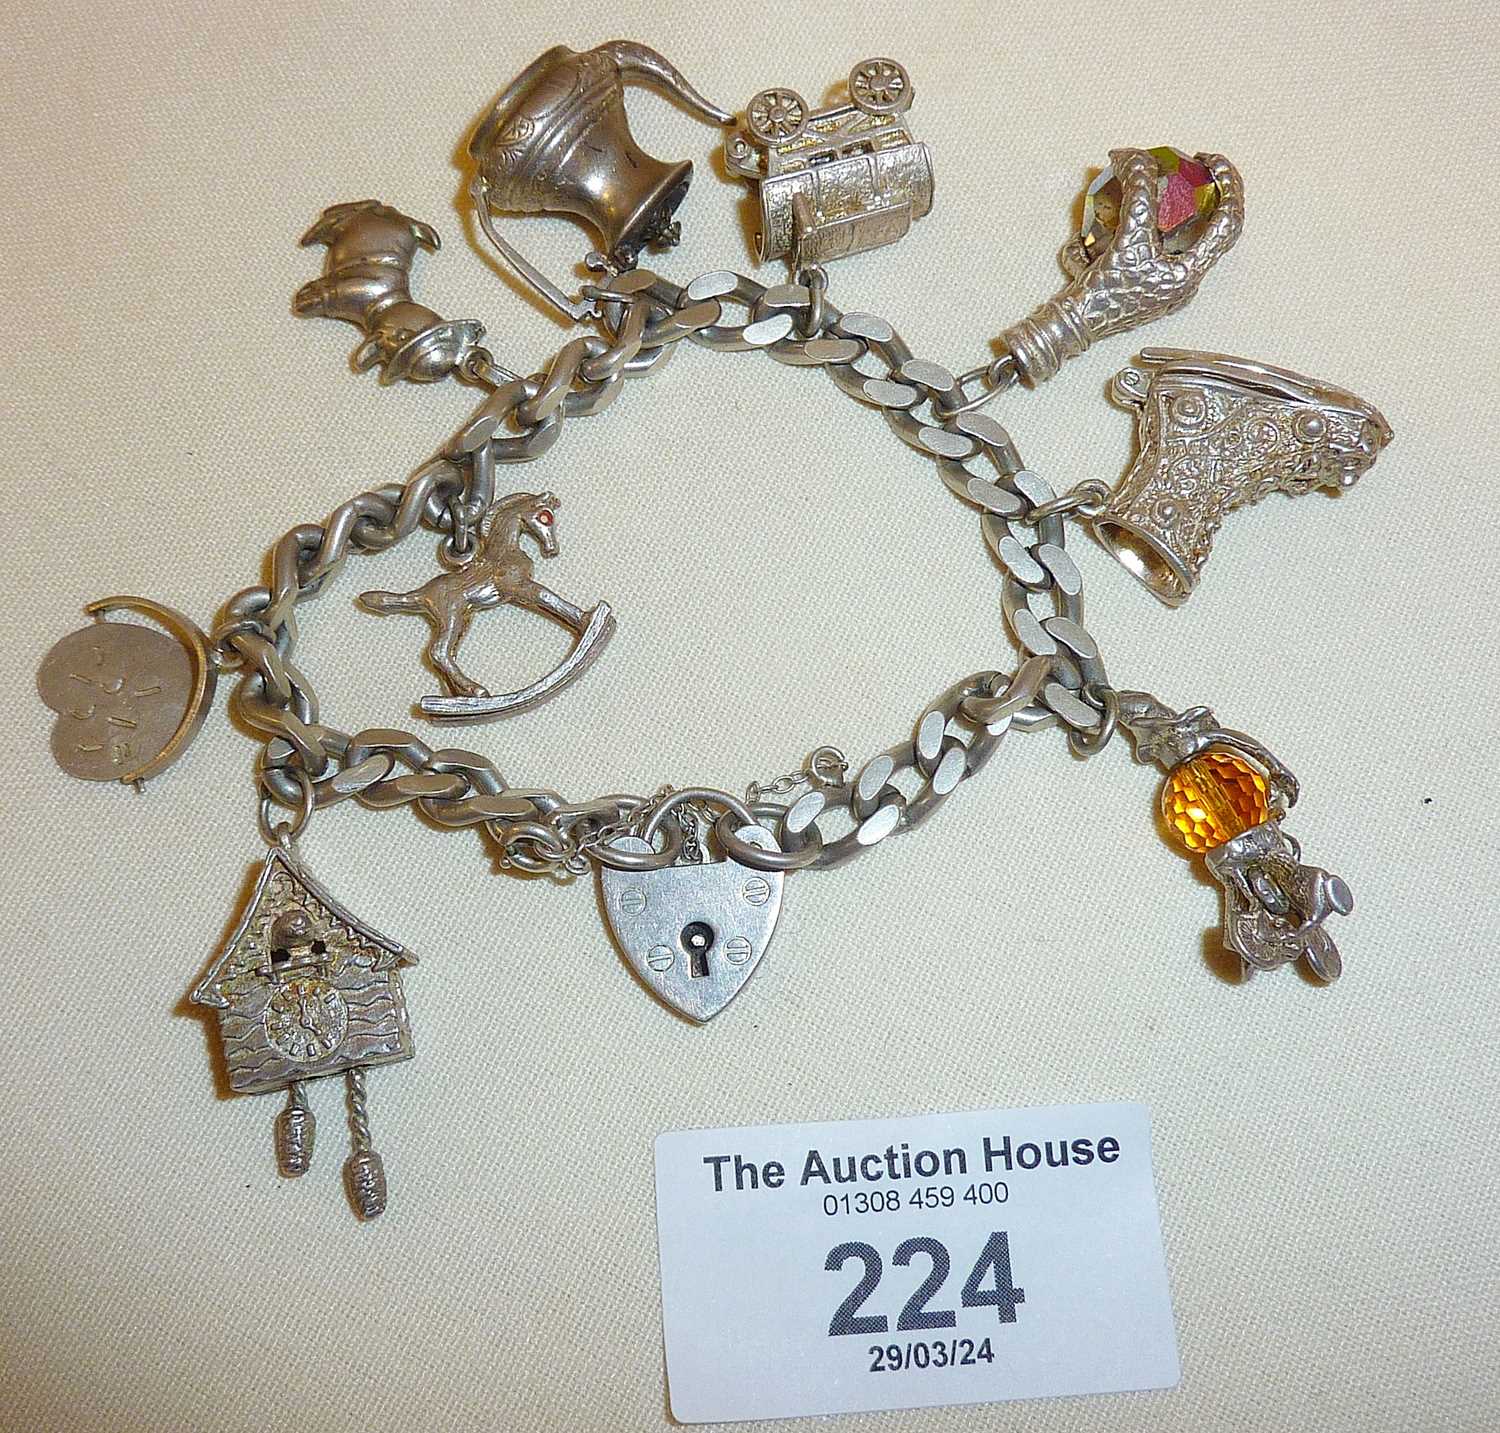 Vintage heavy silver charm bracelet with nine charms - some opening. Has a padlock clasp, and weighs